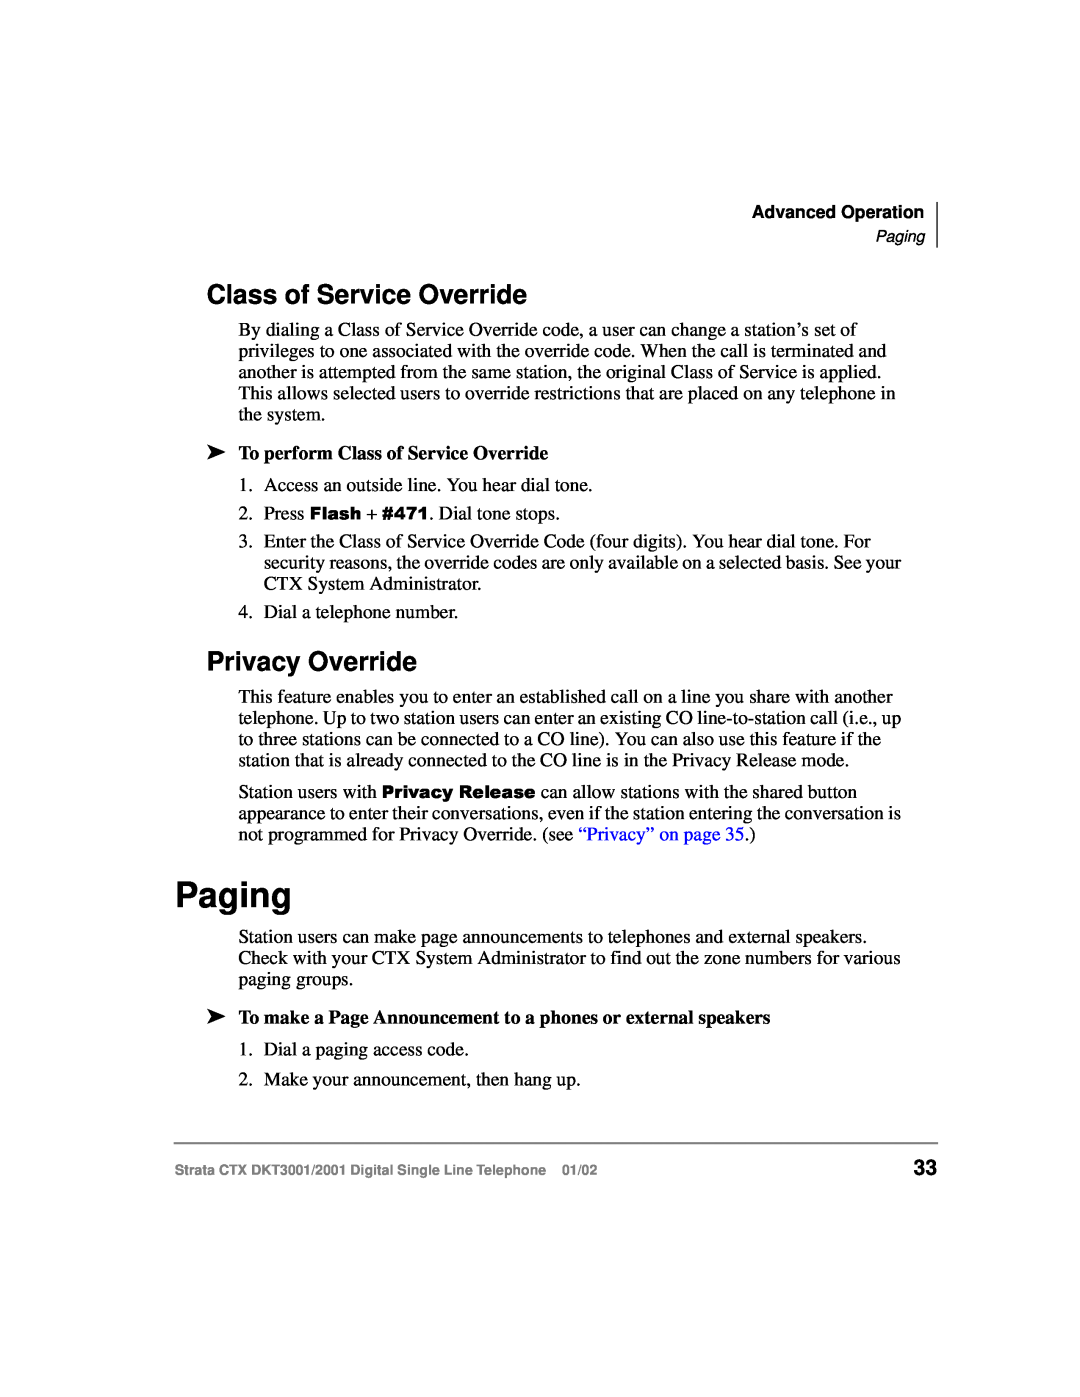 Toshiba 2001, DXT3001 manual Paging, Privacy Override, To perform Class of Service Override 